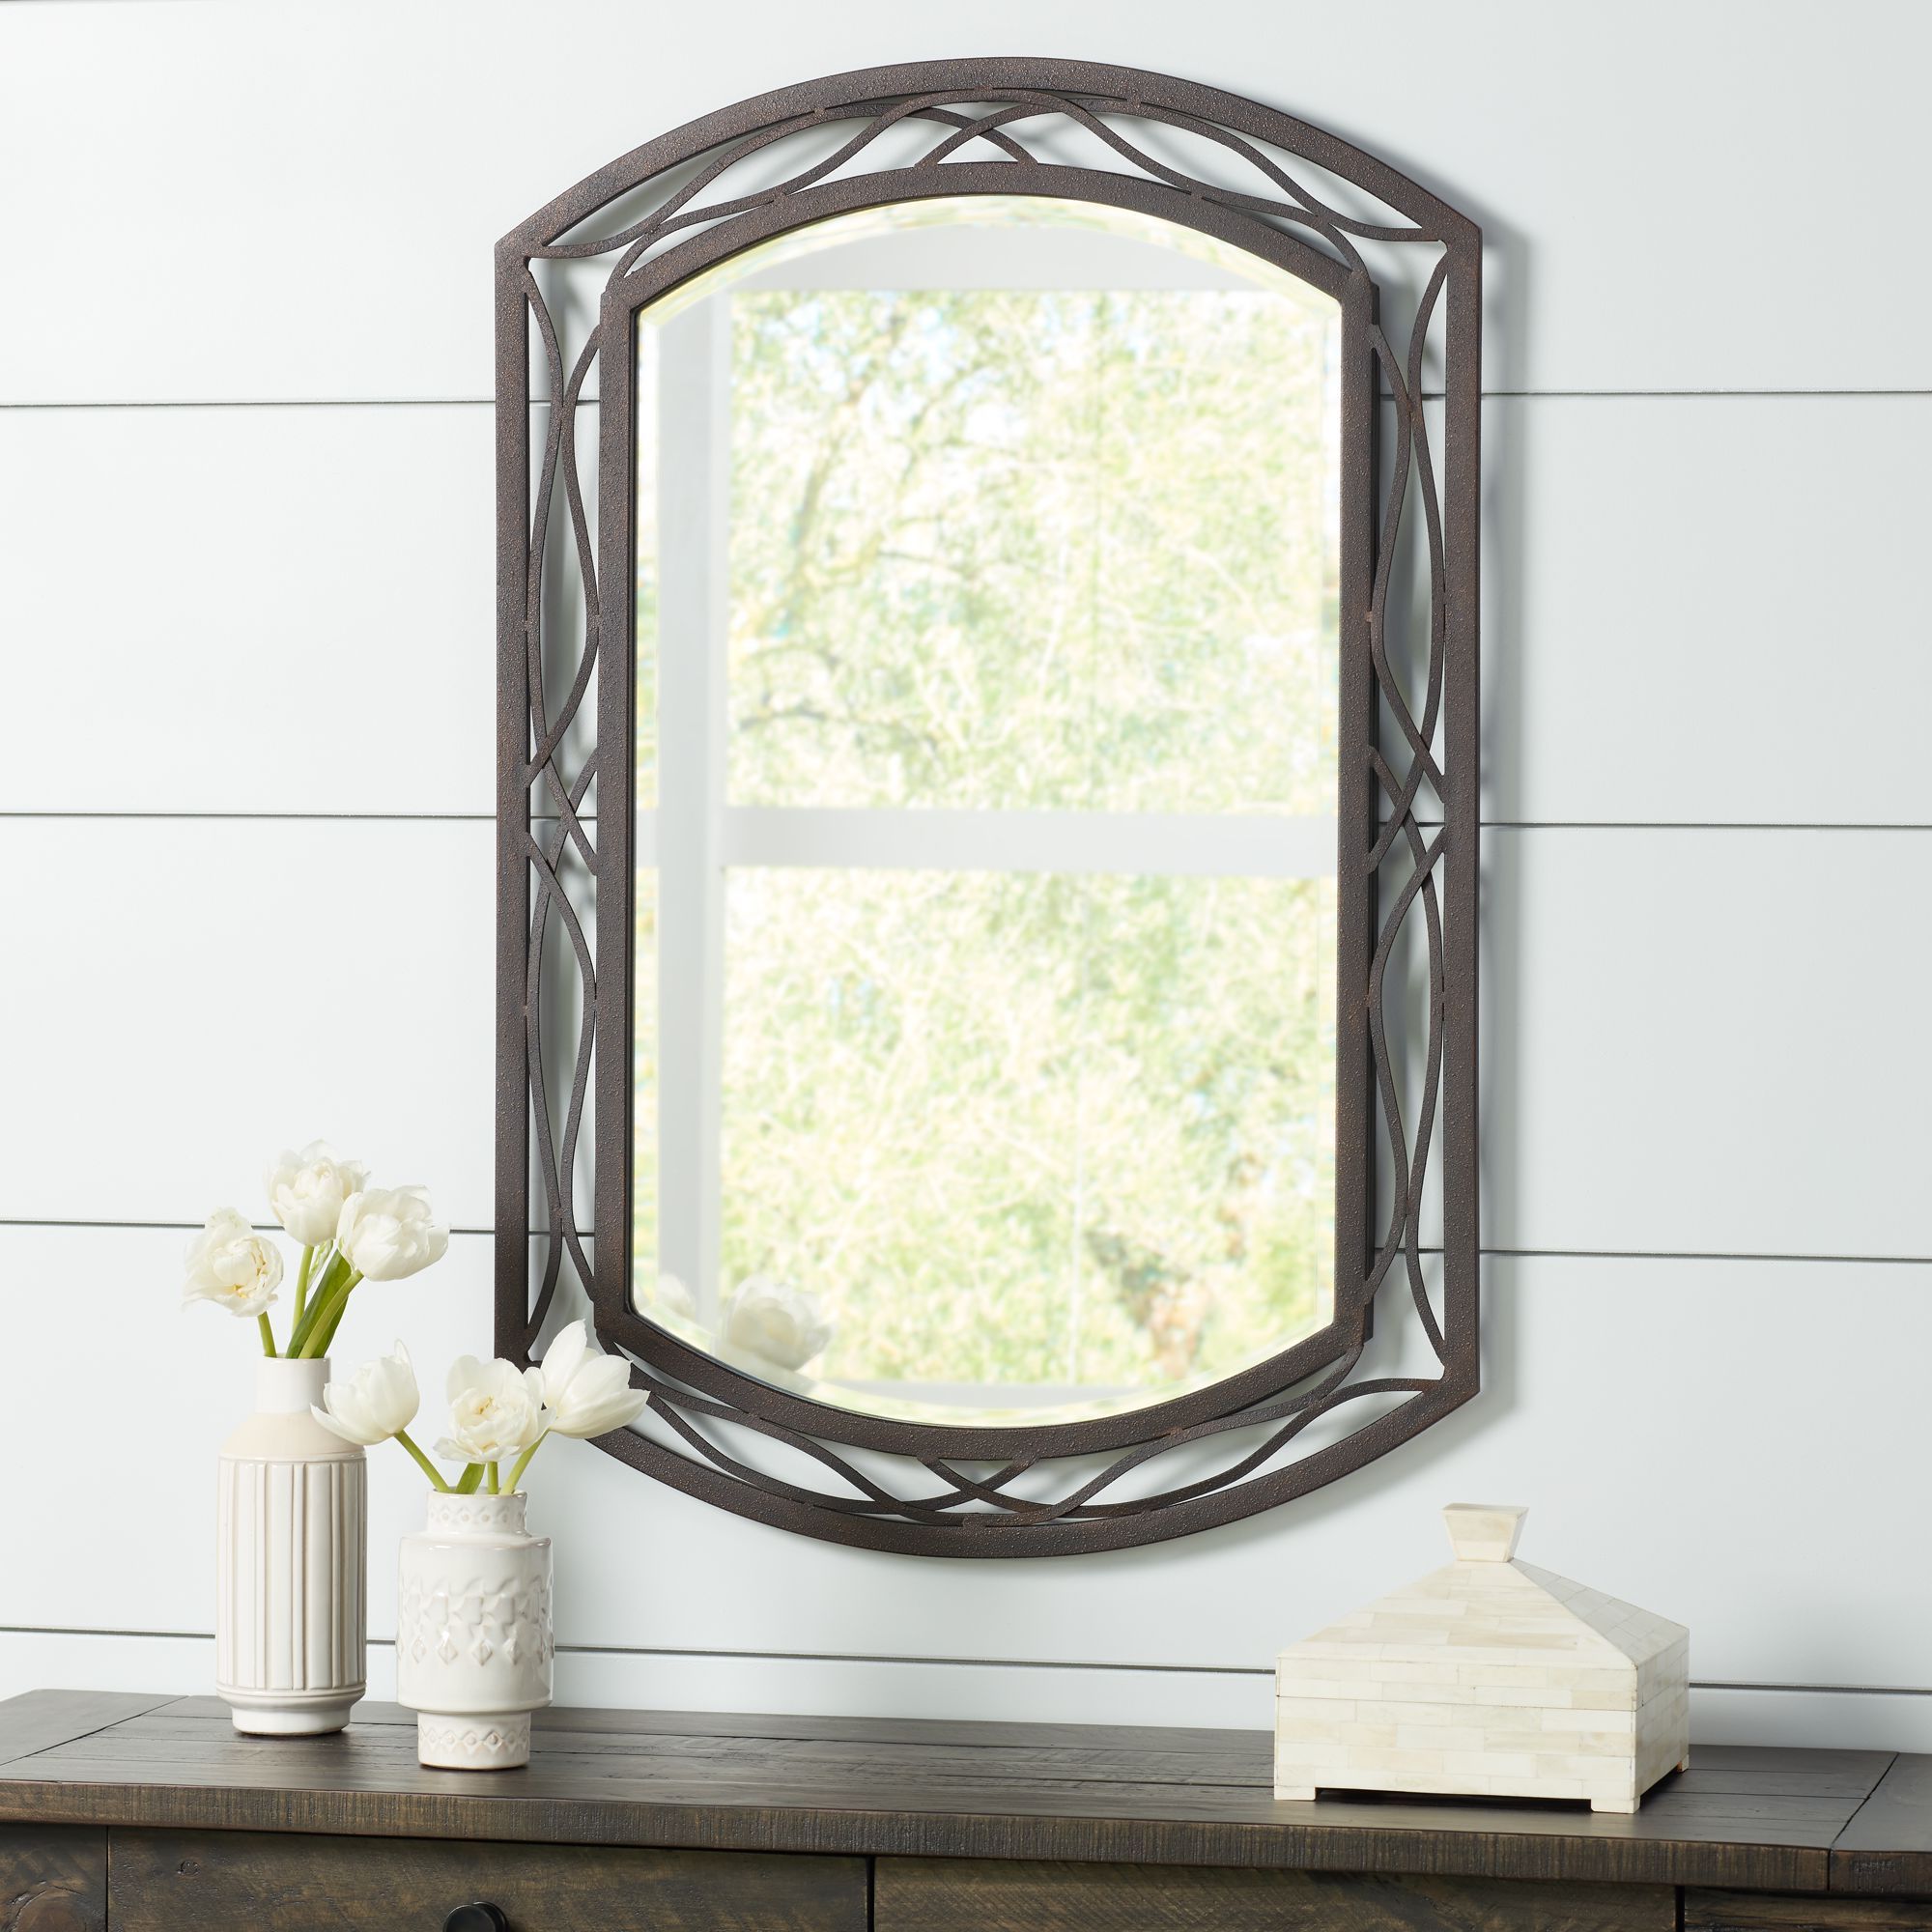 Latest Franklin Iron Works Woven Bronze 24" X 35 1/2" Metal Wall Mirror Regarding Silver And Bronze Wall Mirrors (View 6 of 15)